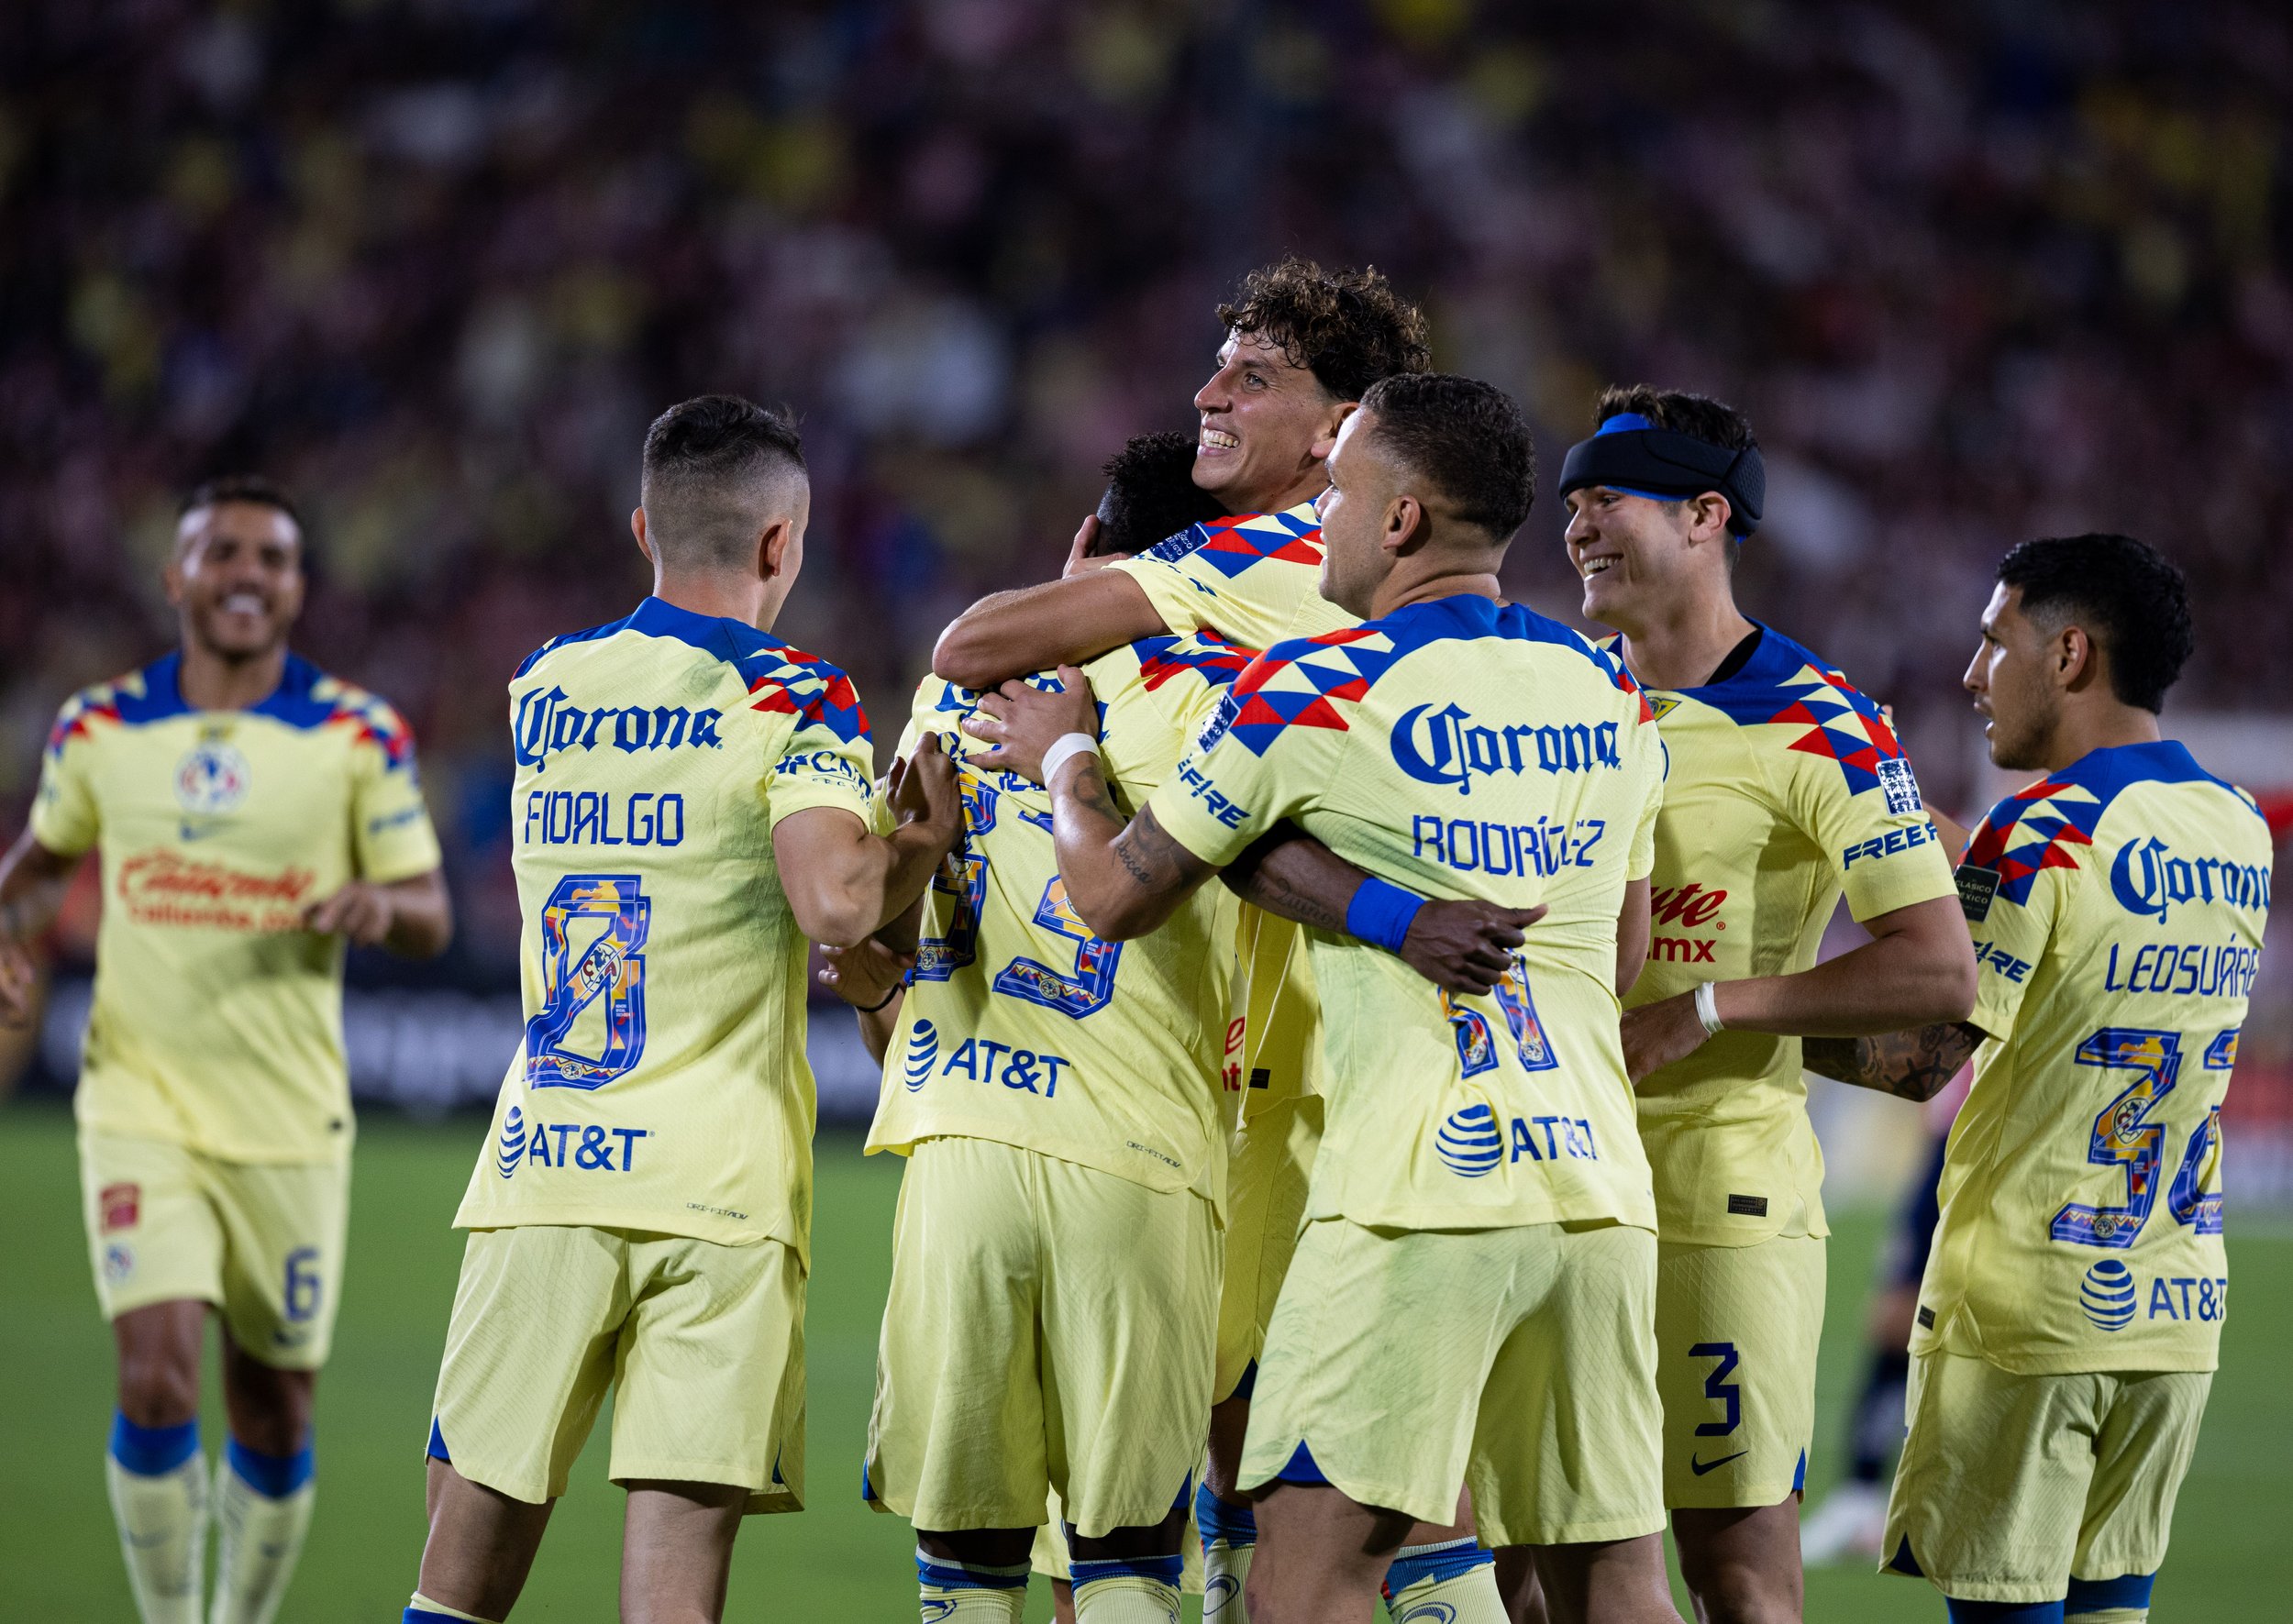  Club America team celebrating and hugging centre-forward Julian Quinones after scoring a goal to make the score 2-0 at the Rose Bowl in Pasadena, Calif. on Sunday, Oct. 15. (Danilo Perez | The Corsair) 